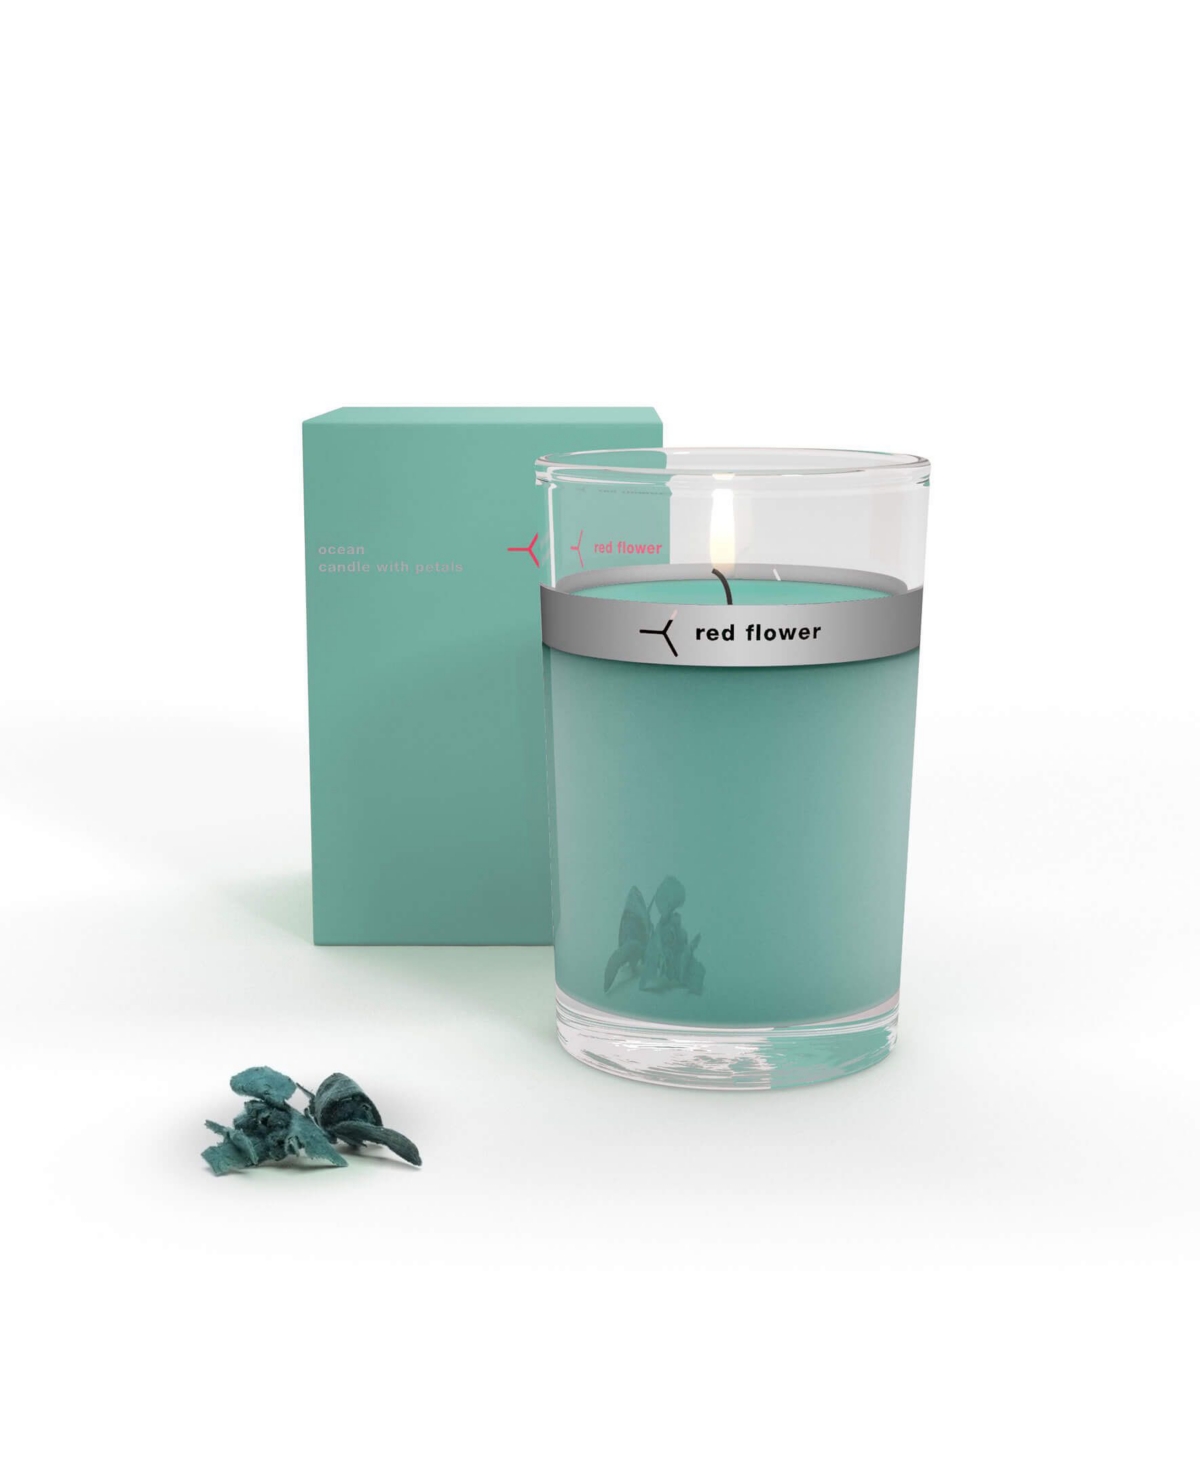 Ocean Petal Topped Candle, 6 oz - Turquoise